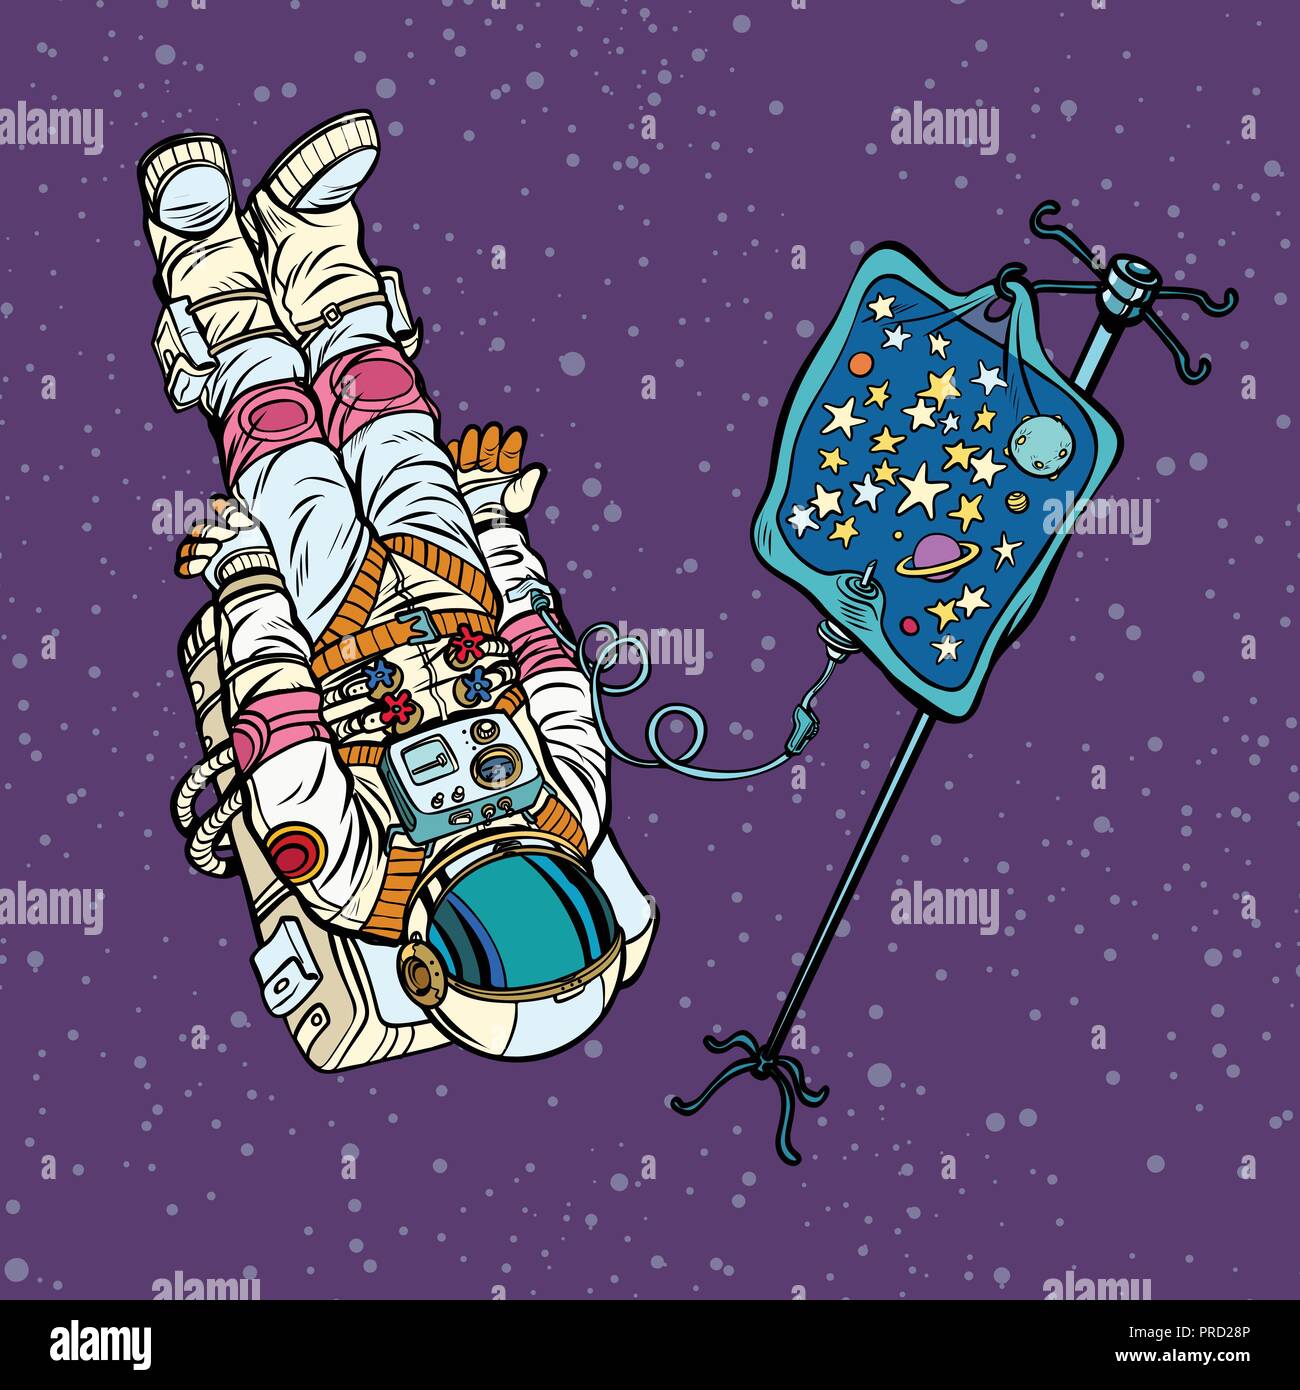 Star fever. Astronaut under medical dropper. Connected to the un Stock Vector